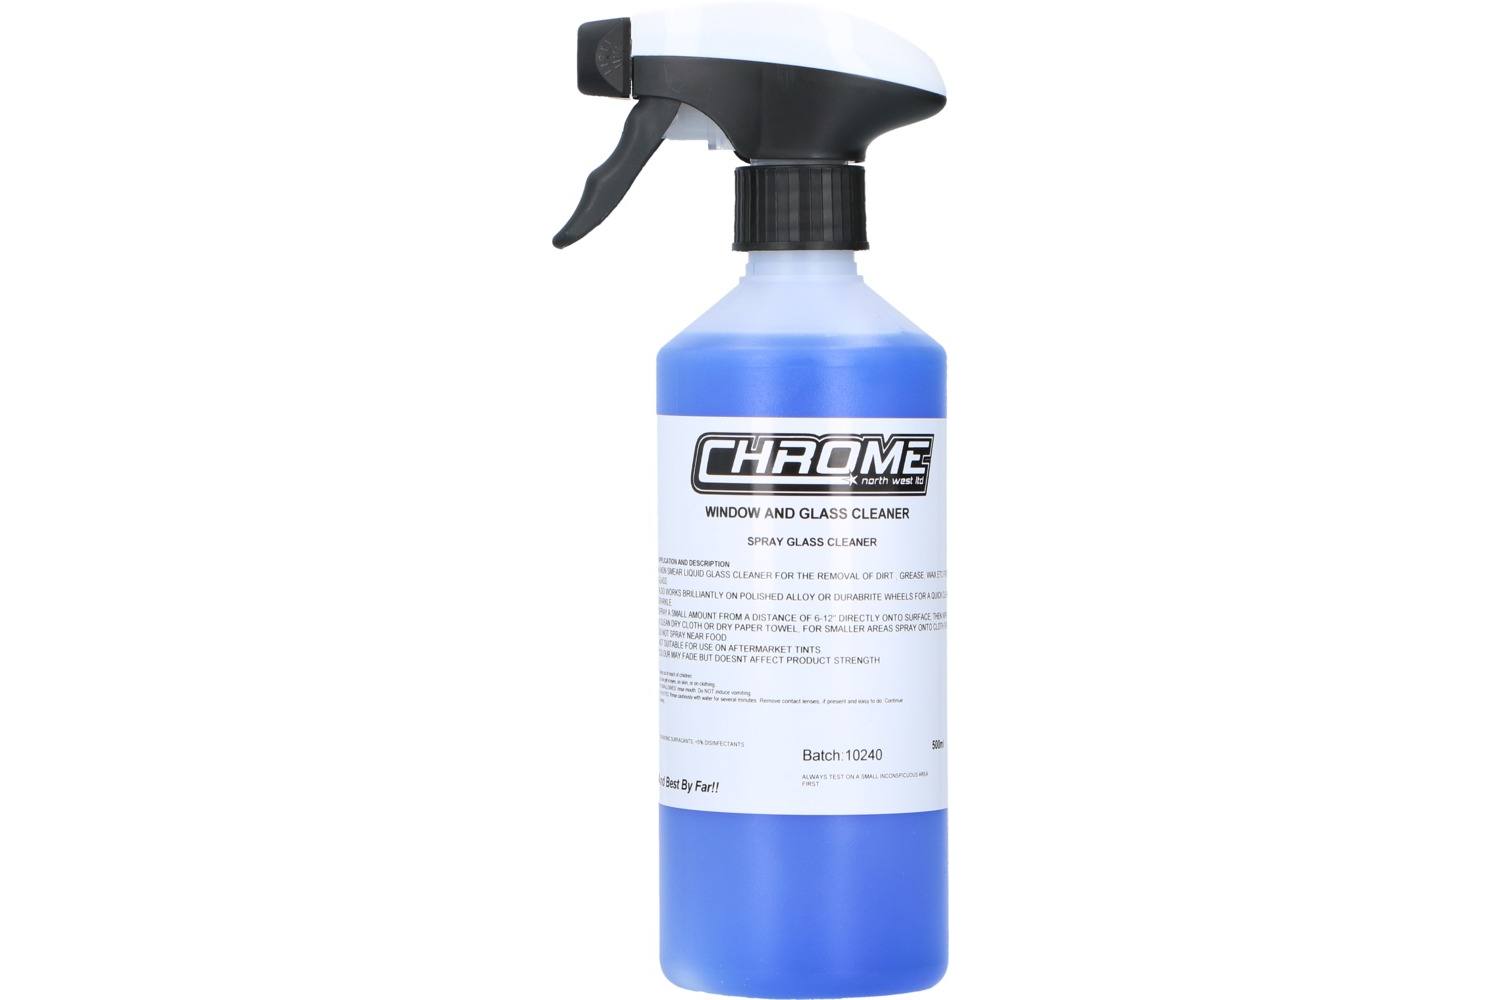 Detergent, Chrome, window and glass cleaner, 500ml 2